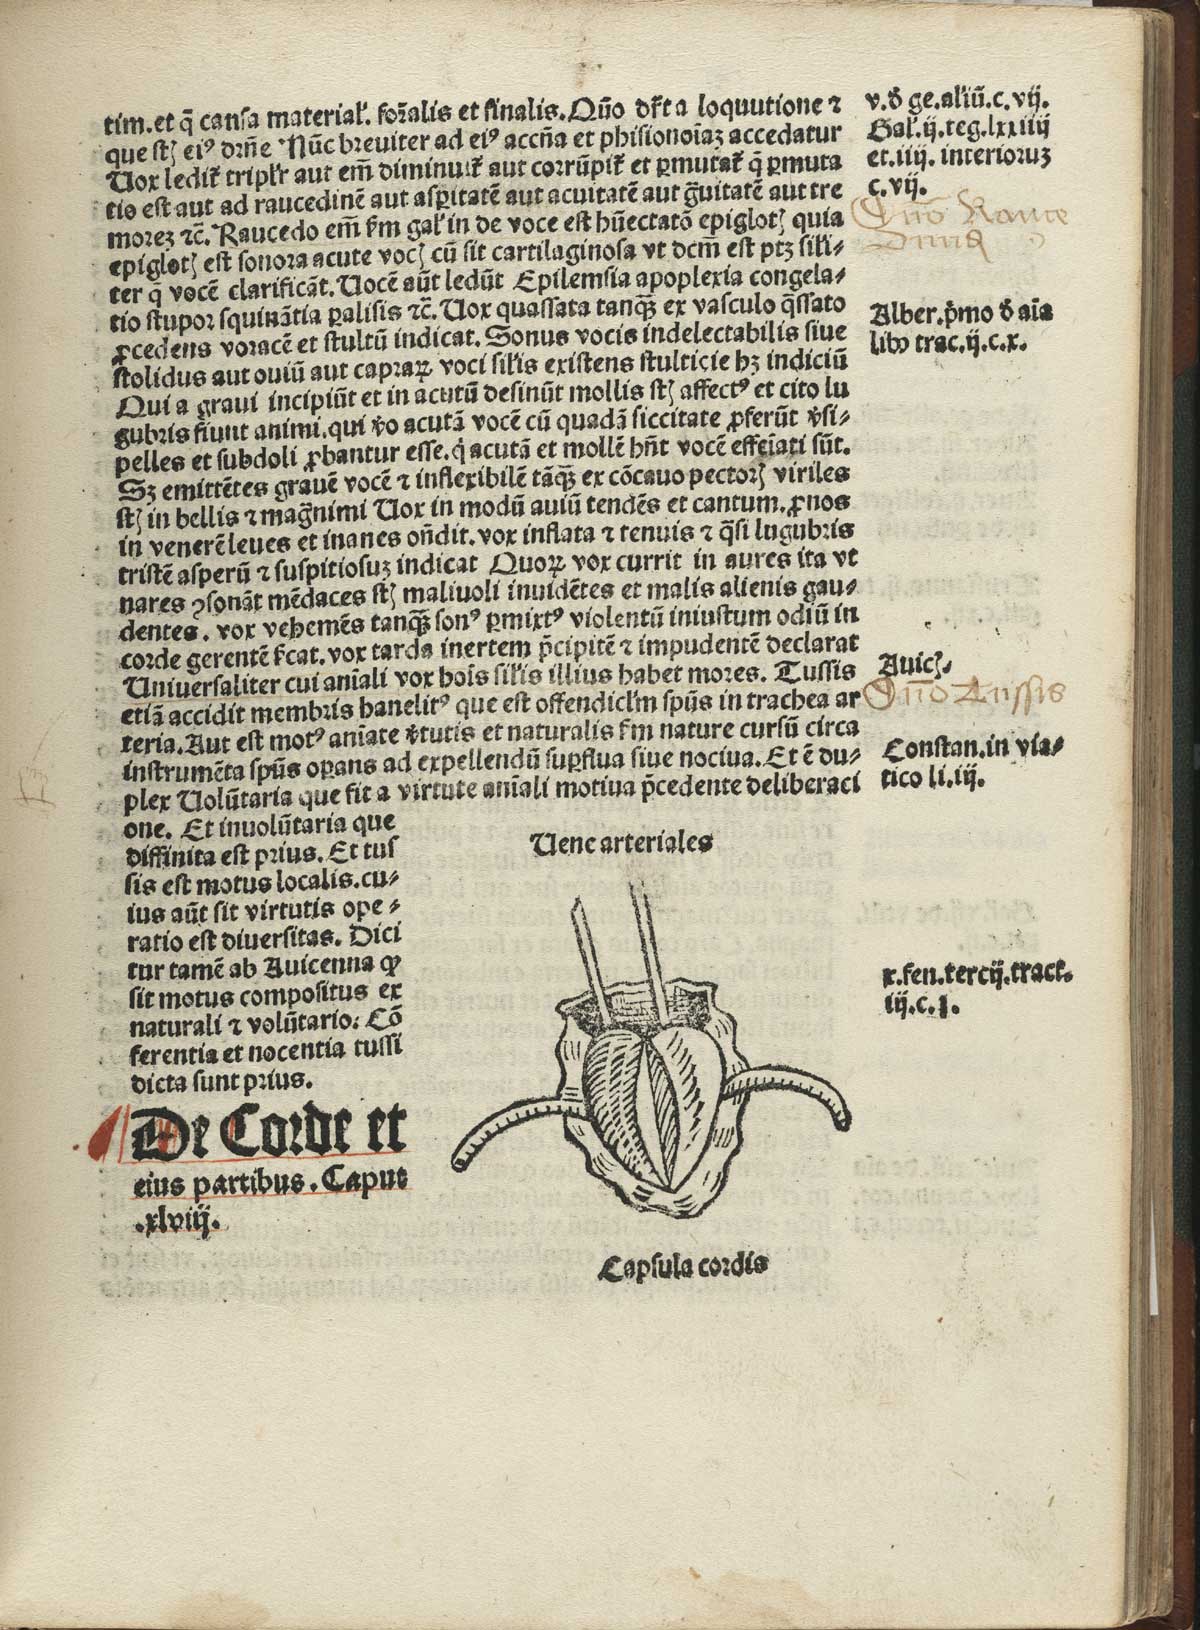 Page 143 of Magnus Hundt's Antropologium de hominis dignitate, natura et proprietatibus, de elementis, partibus et membris humani corporis, featuring an illustration of the heart in the bottom right corner of the page as well as handwritten commentary in the margins.